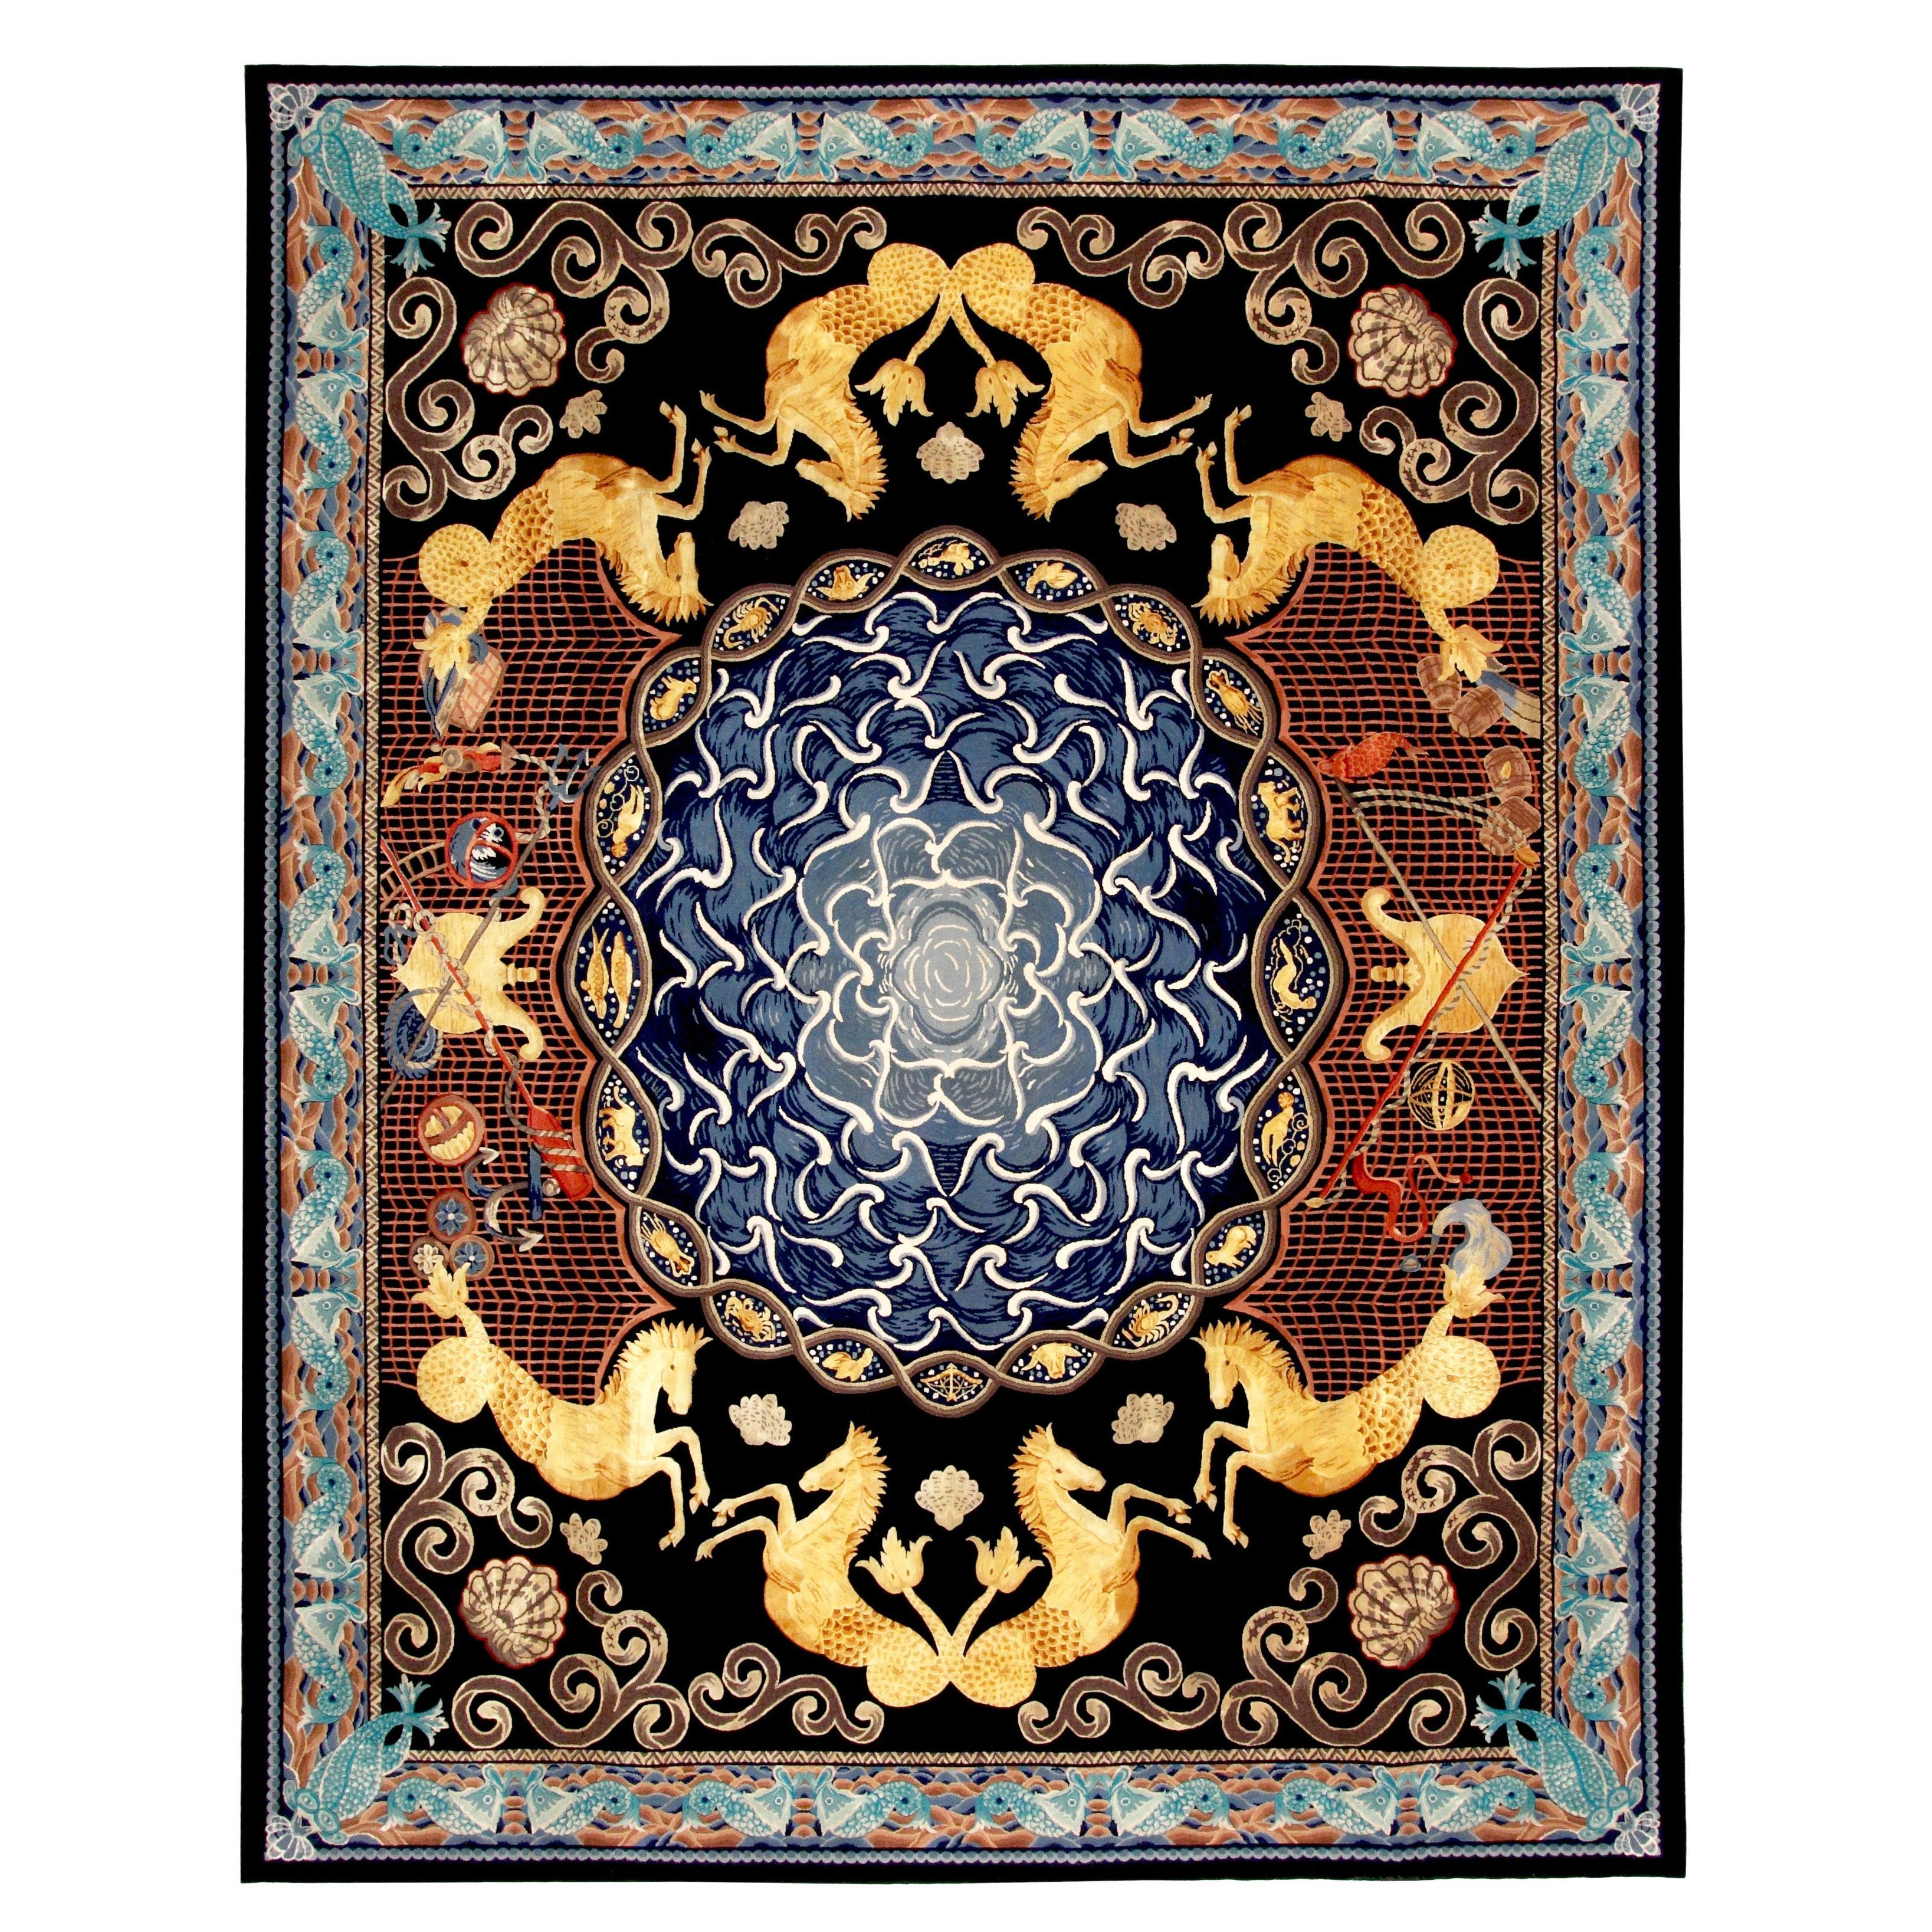 Via Como, 'Zodiaco' Rug Wool and Silk Hand Knotted Rug 